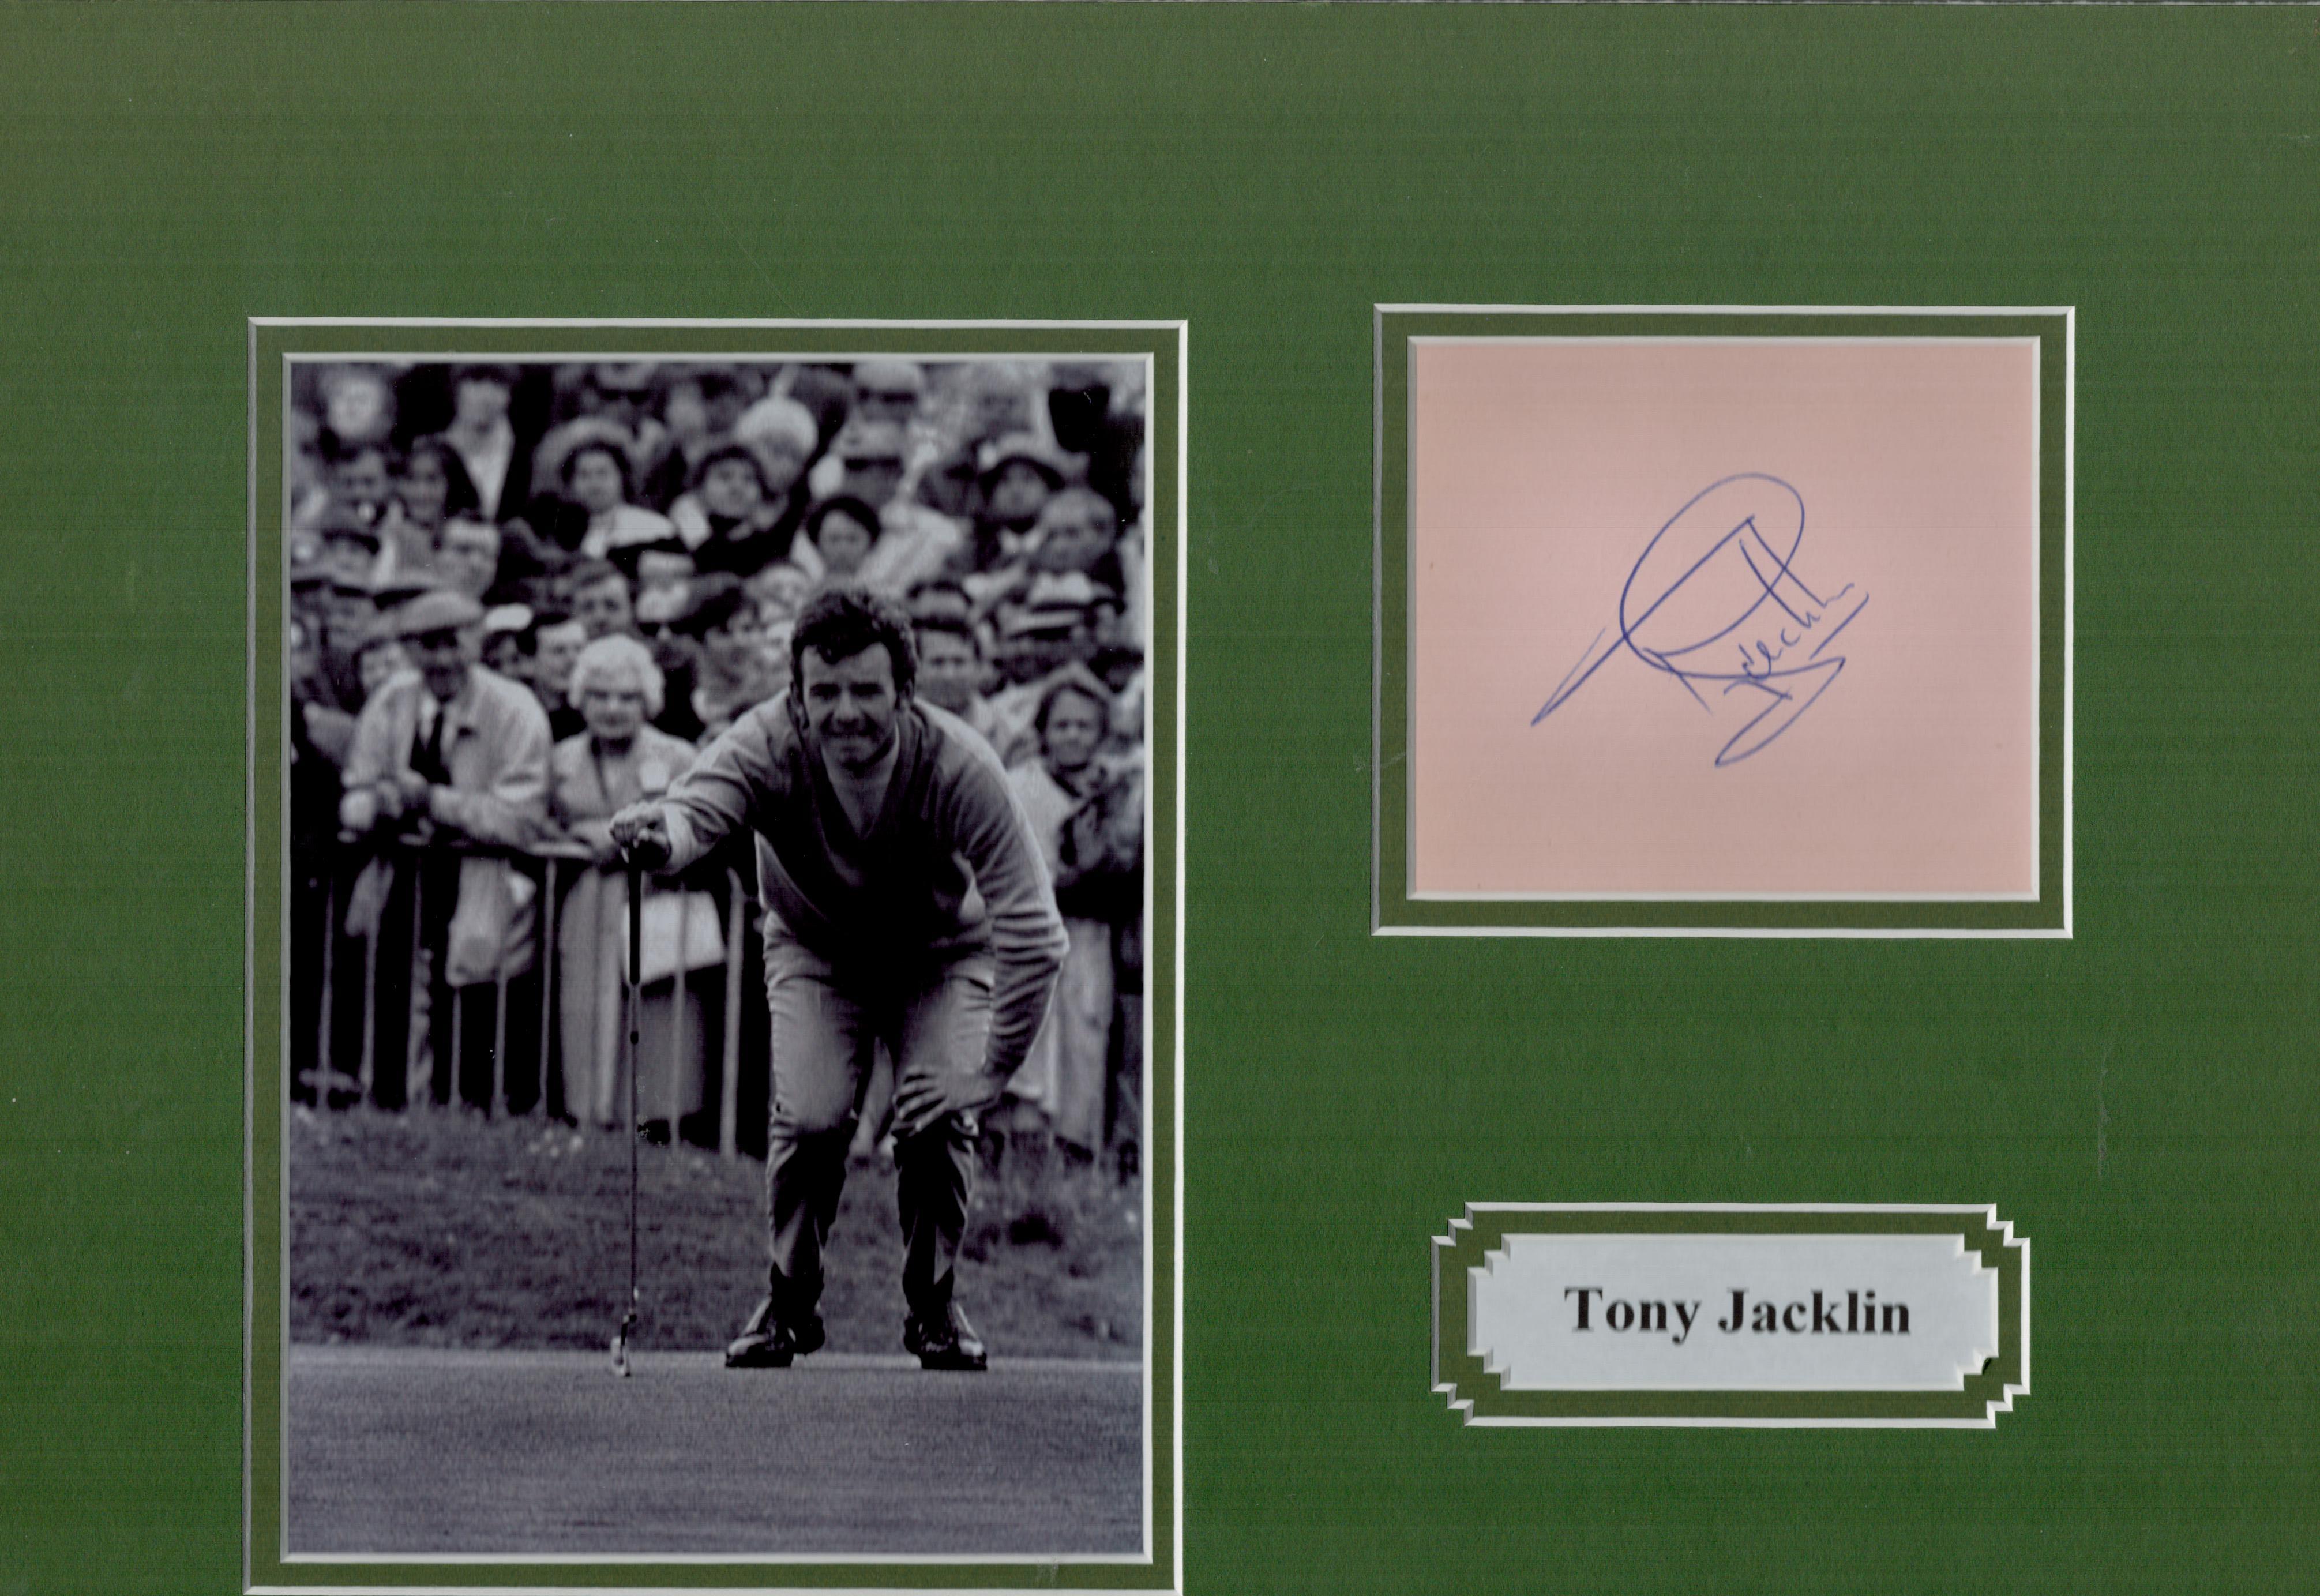 Tony Jacklin 11x14 overall size mounted signature piece. Jacklin CBE (born 7 July 1944) is a retired